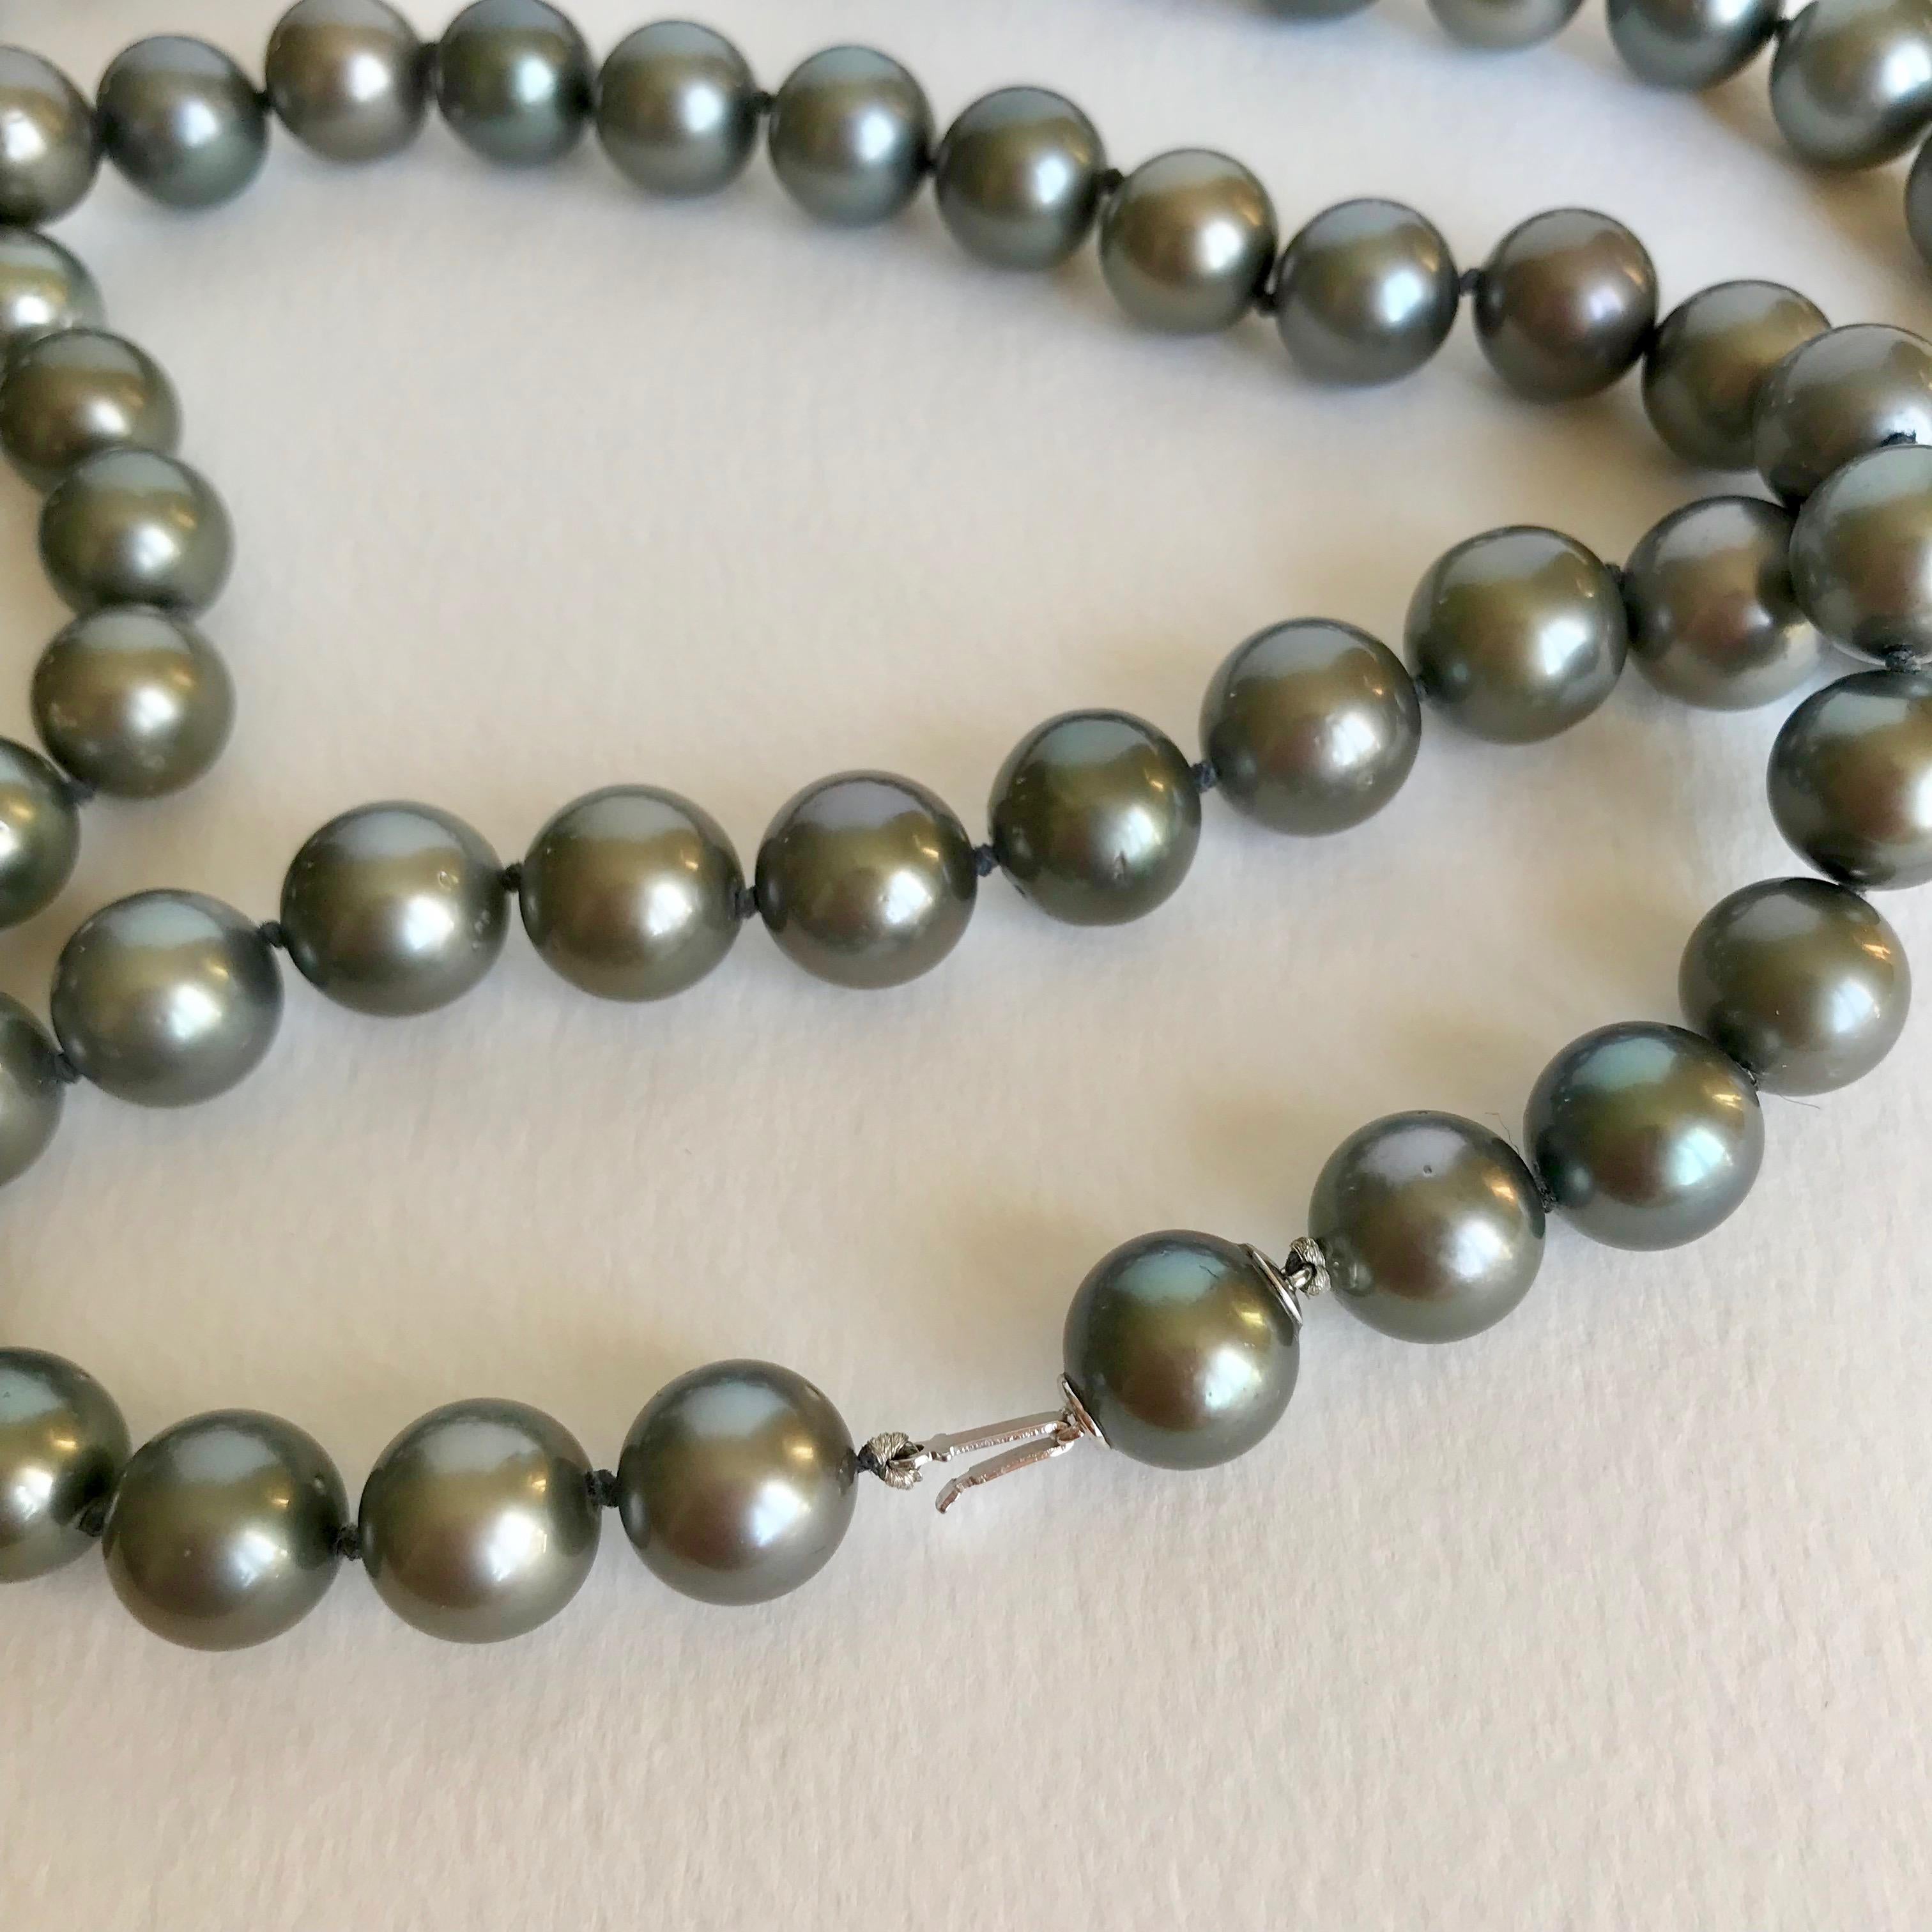 Very Long Necklace of Cultured Grey Pearls 12mm For Sale 6